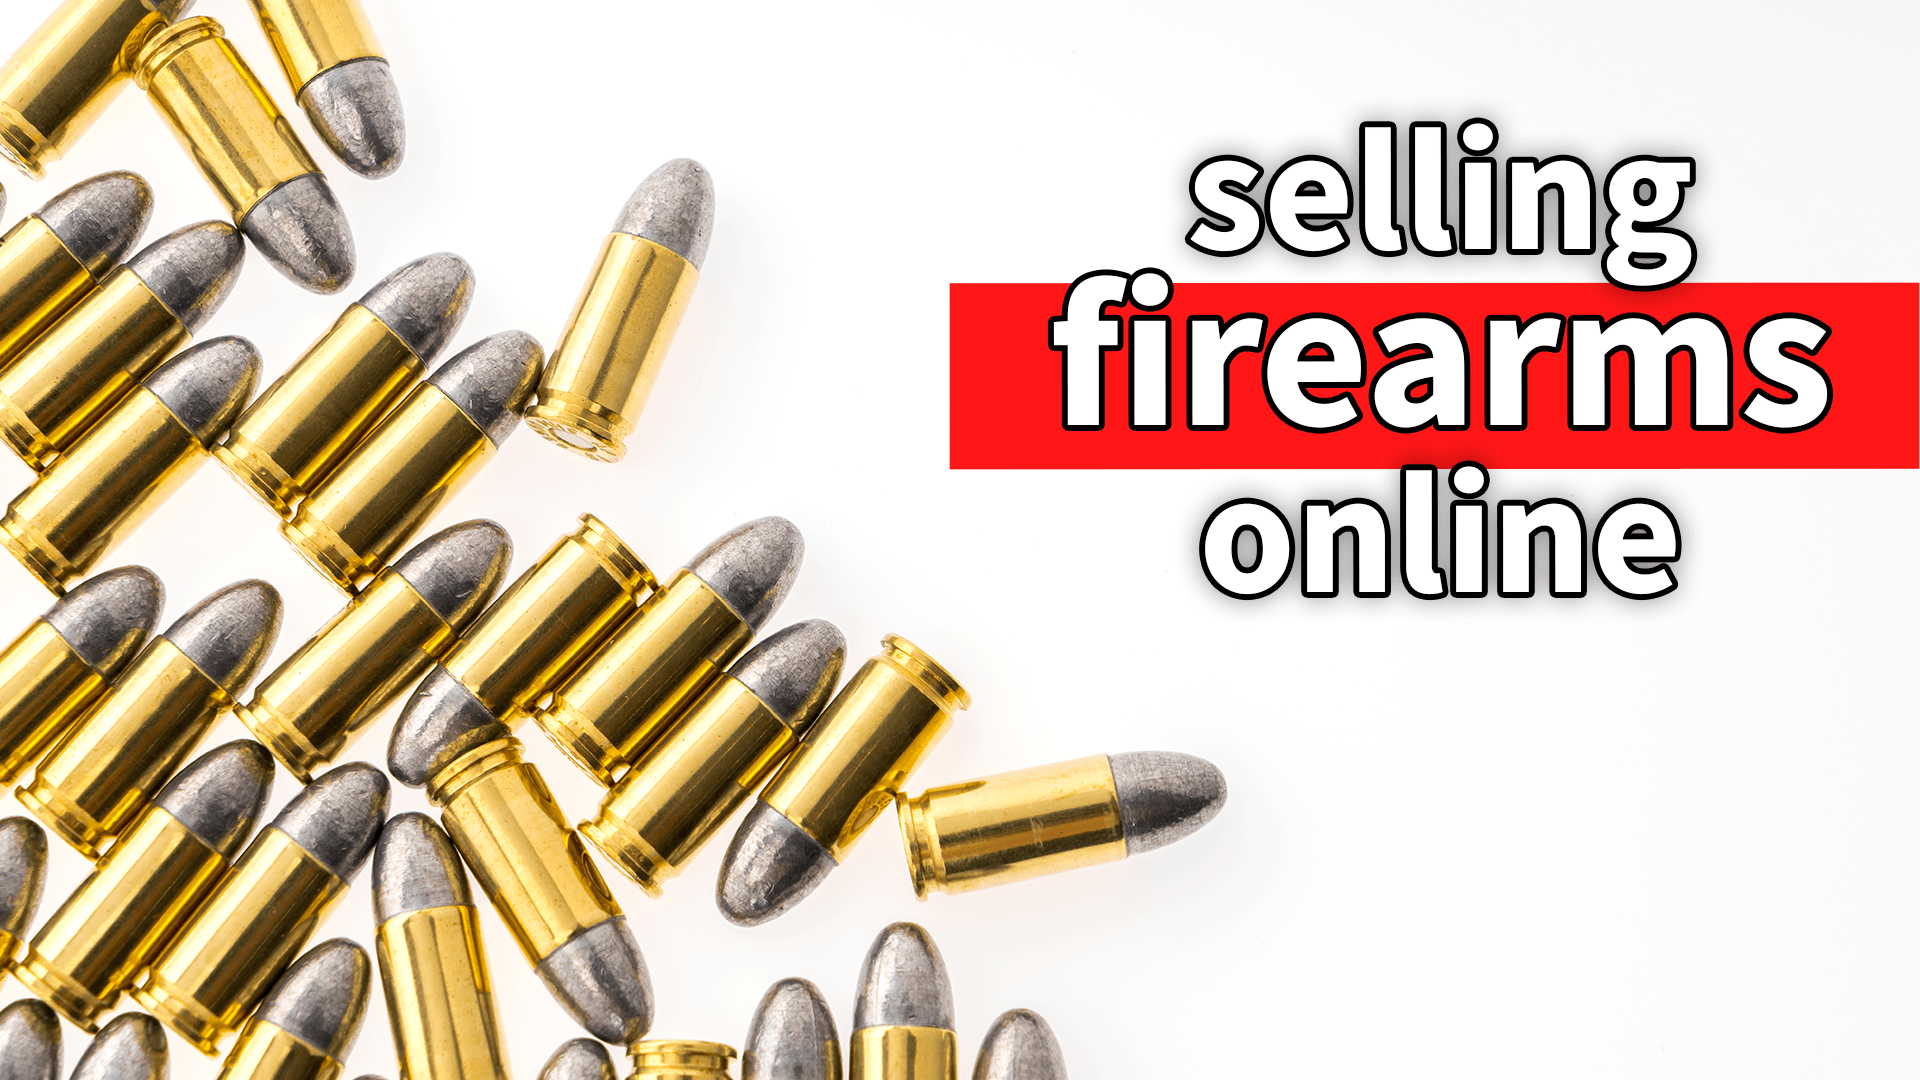 How To Create A Firearms eCommerce Website from Scratch